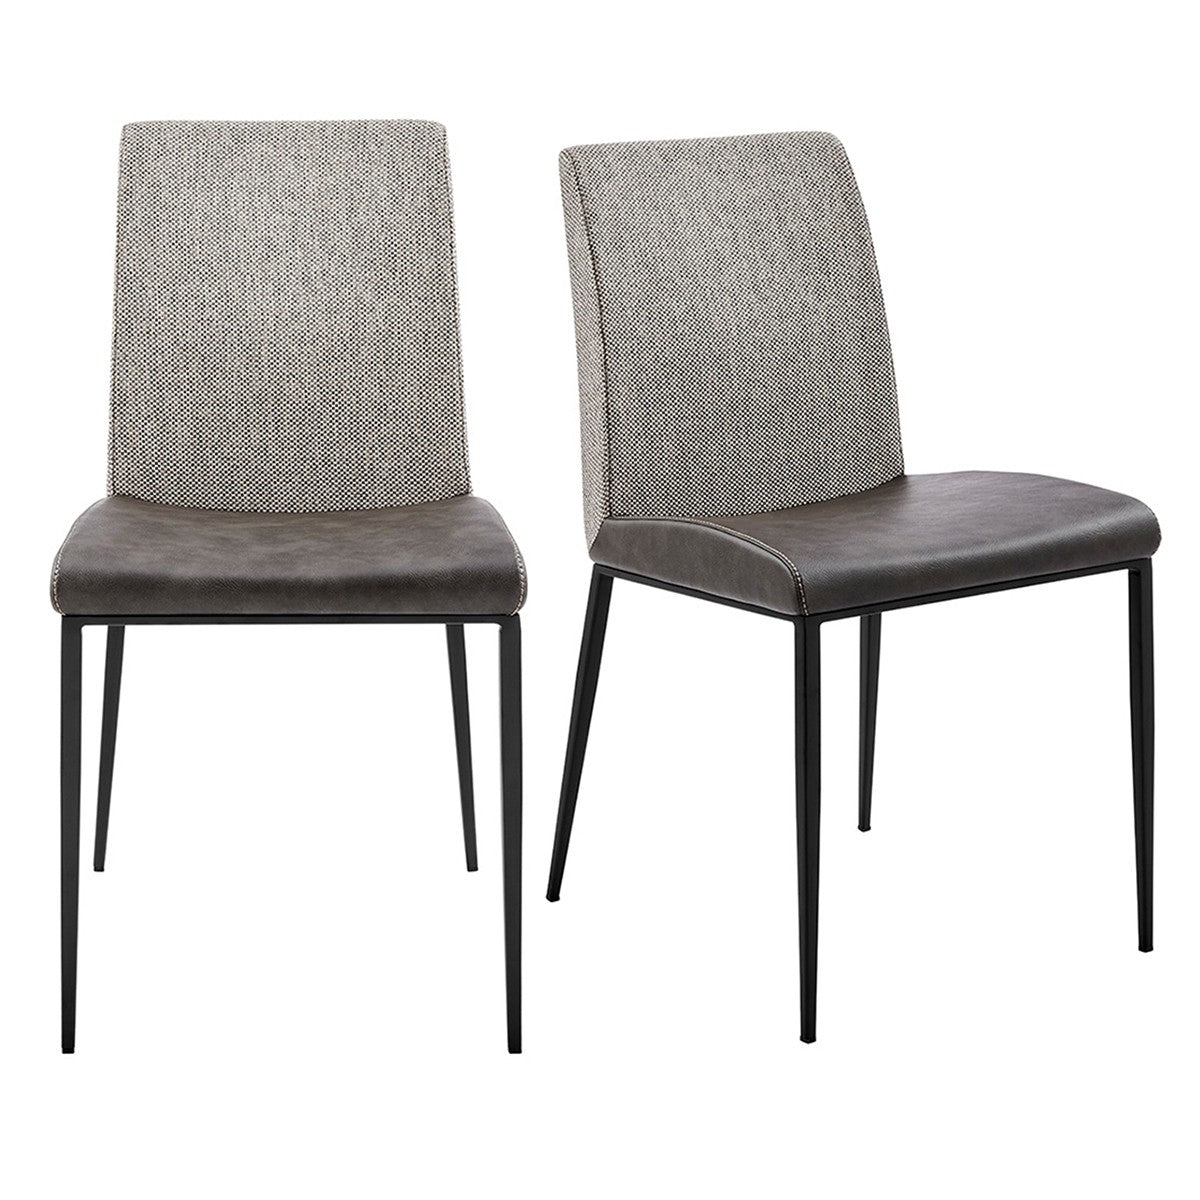 Set of Two Gray and Light Gray Stainless Steel Chairs